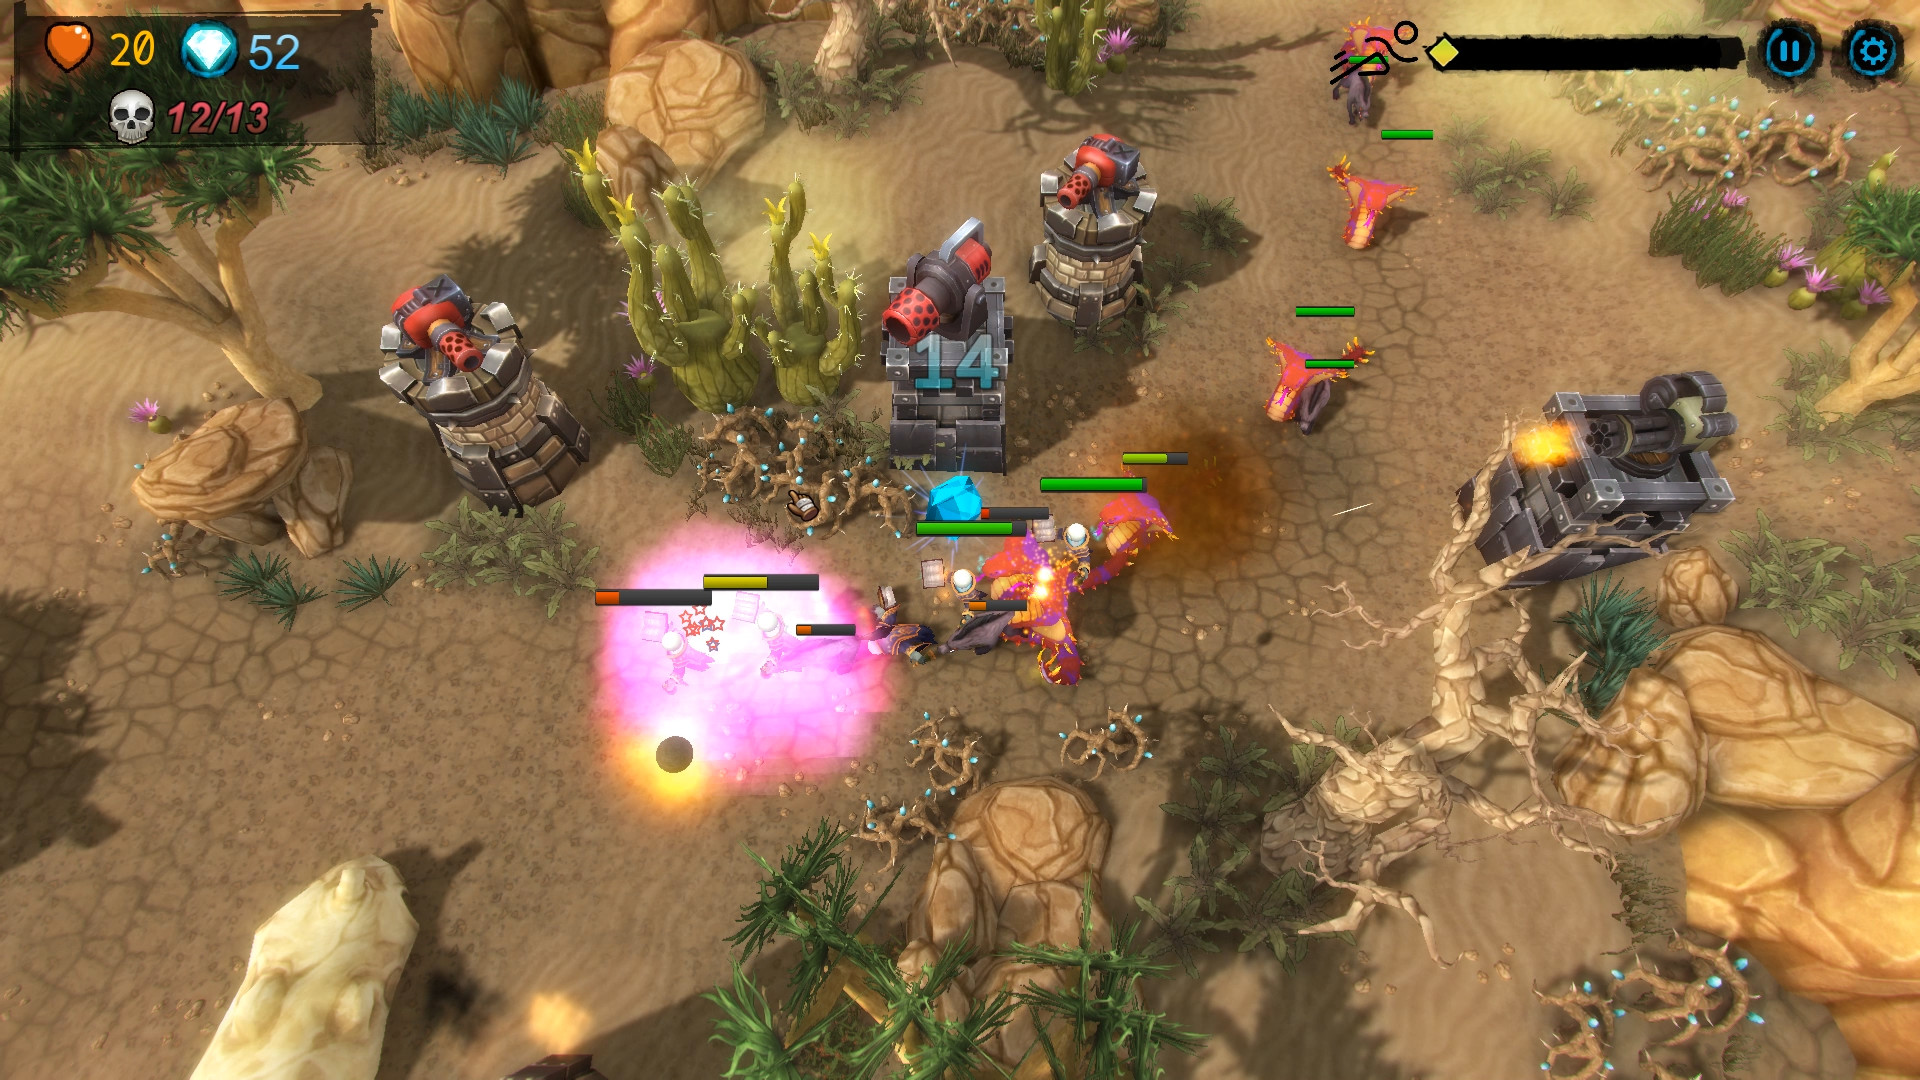 Yet another tower defence screenshot